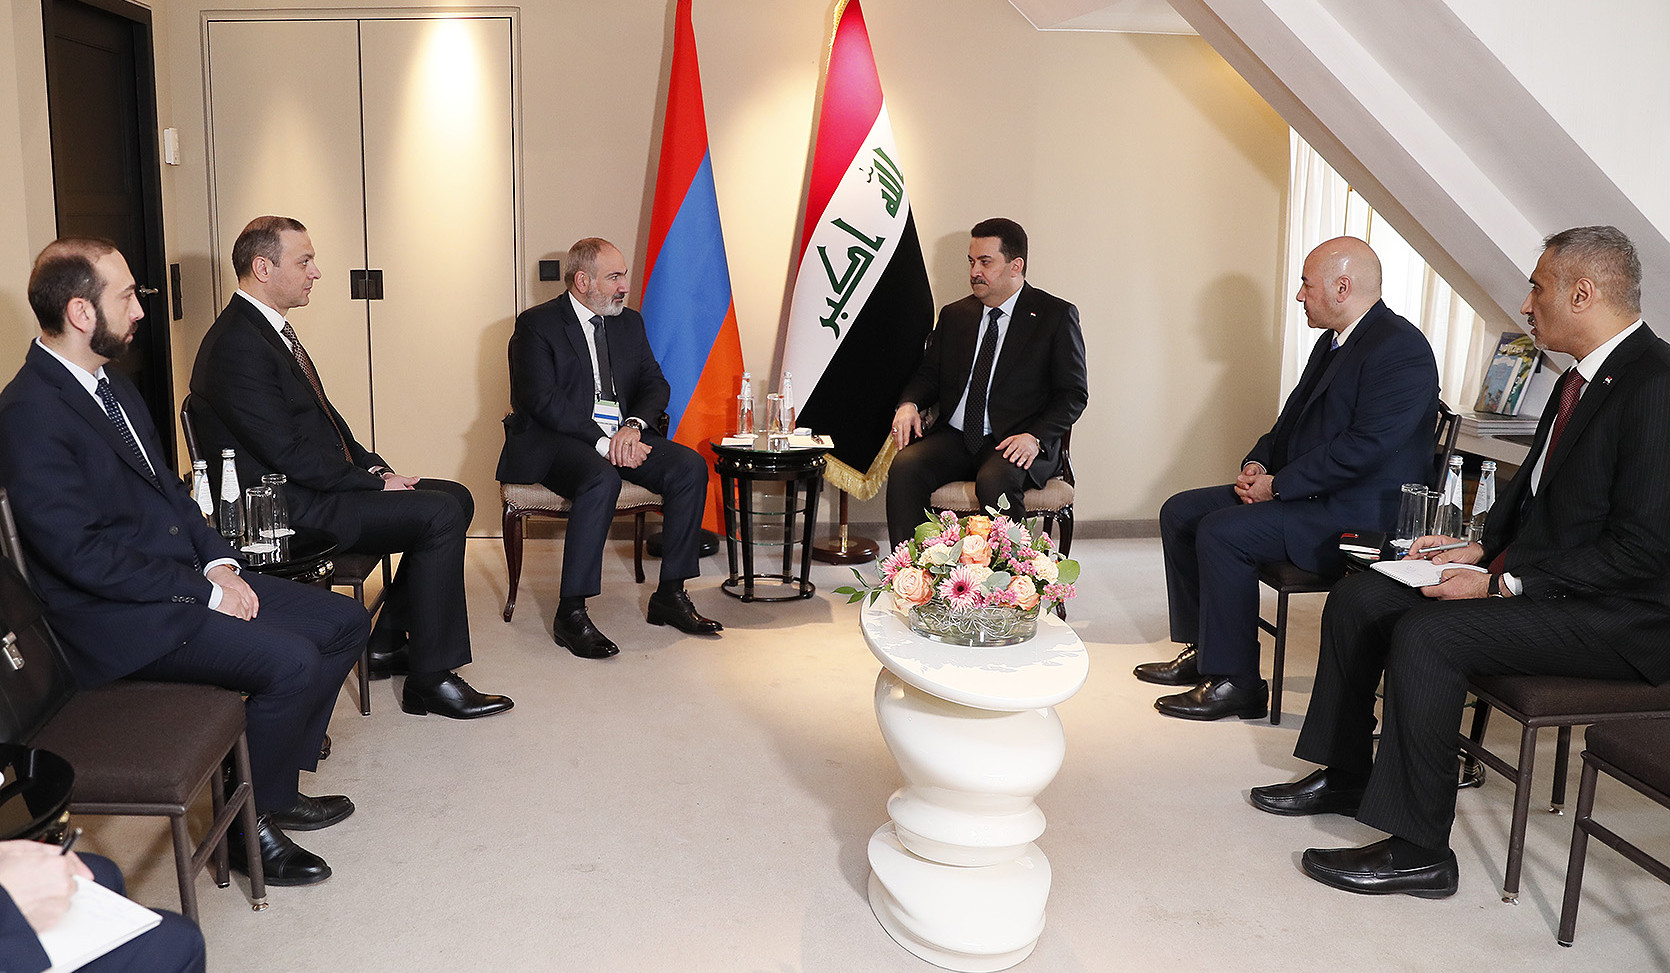 Prime Minister Pashinyan had meeting with Prime Minister of Iraq Mohammed Shia al-Sudani